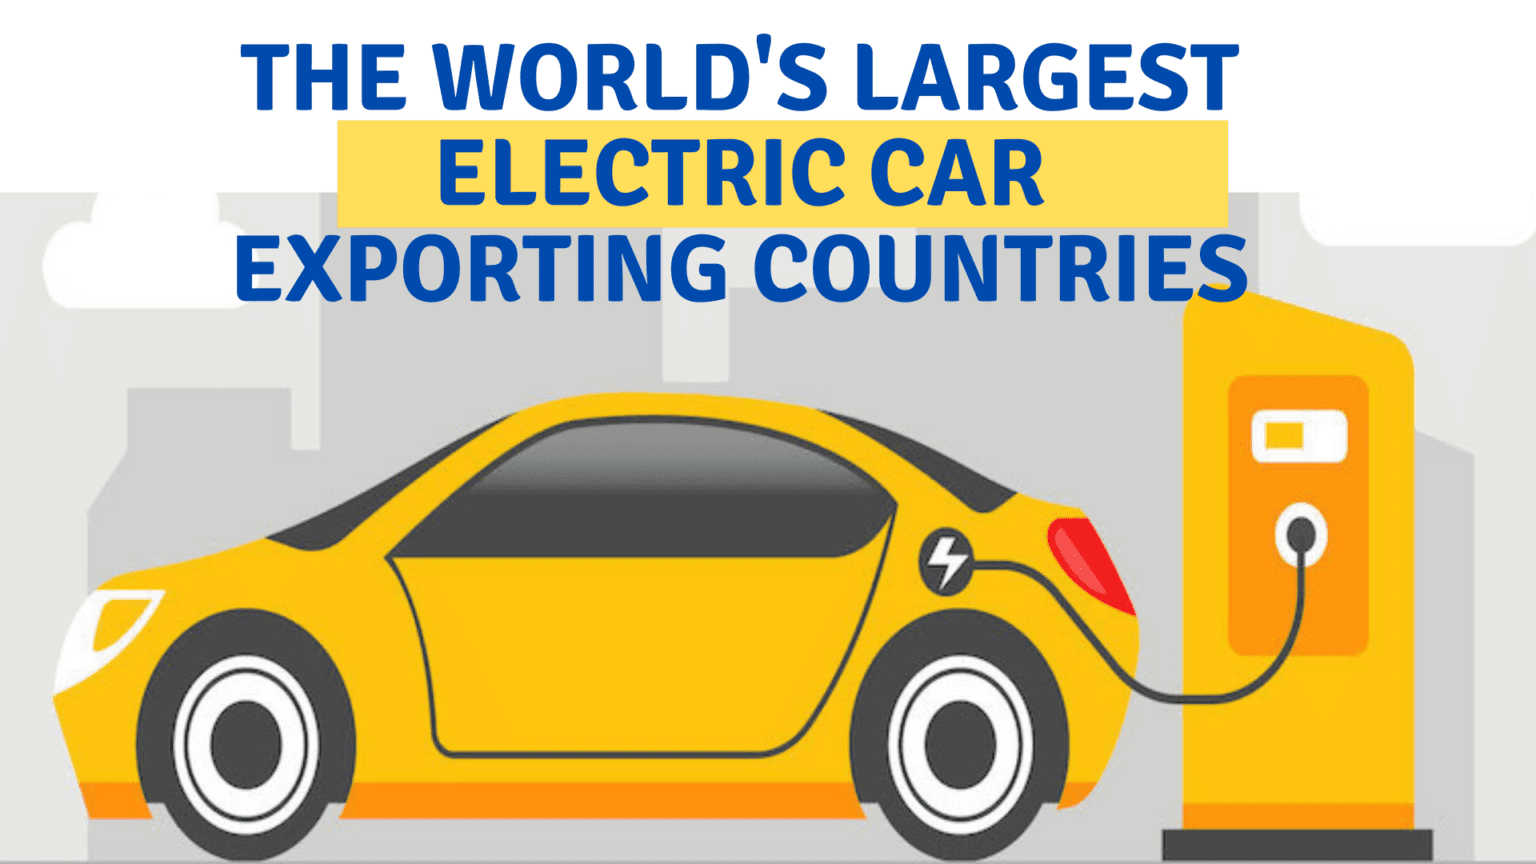 The World's largest Electric Car Exporting Countries